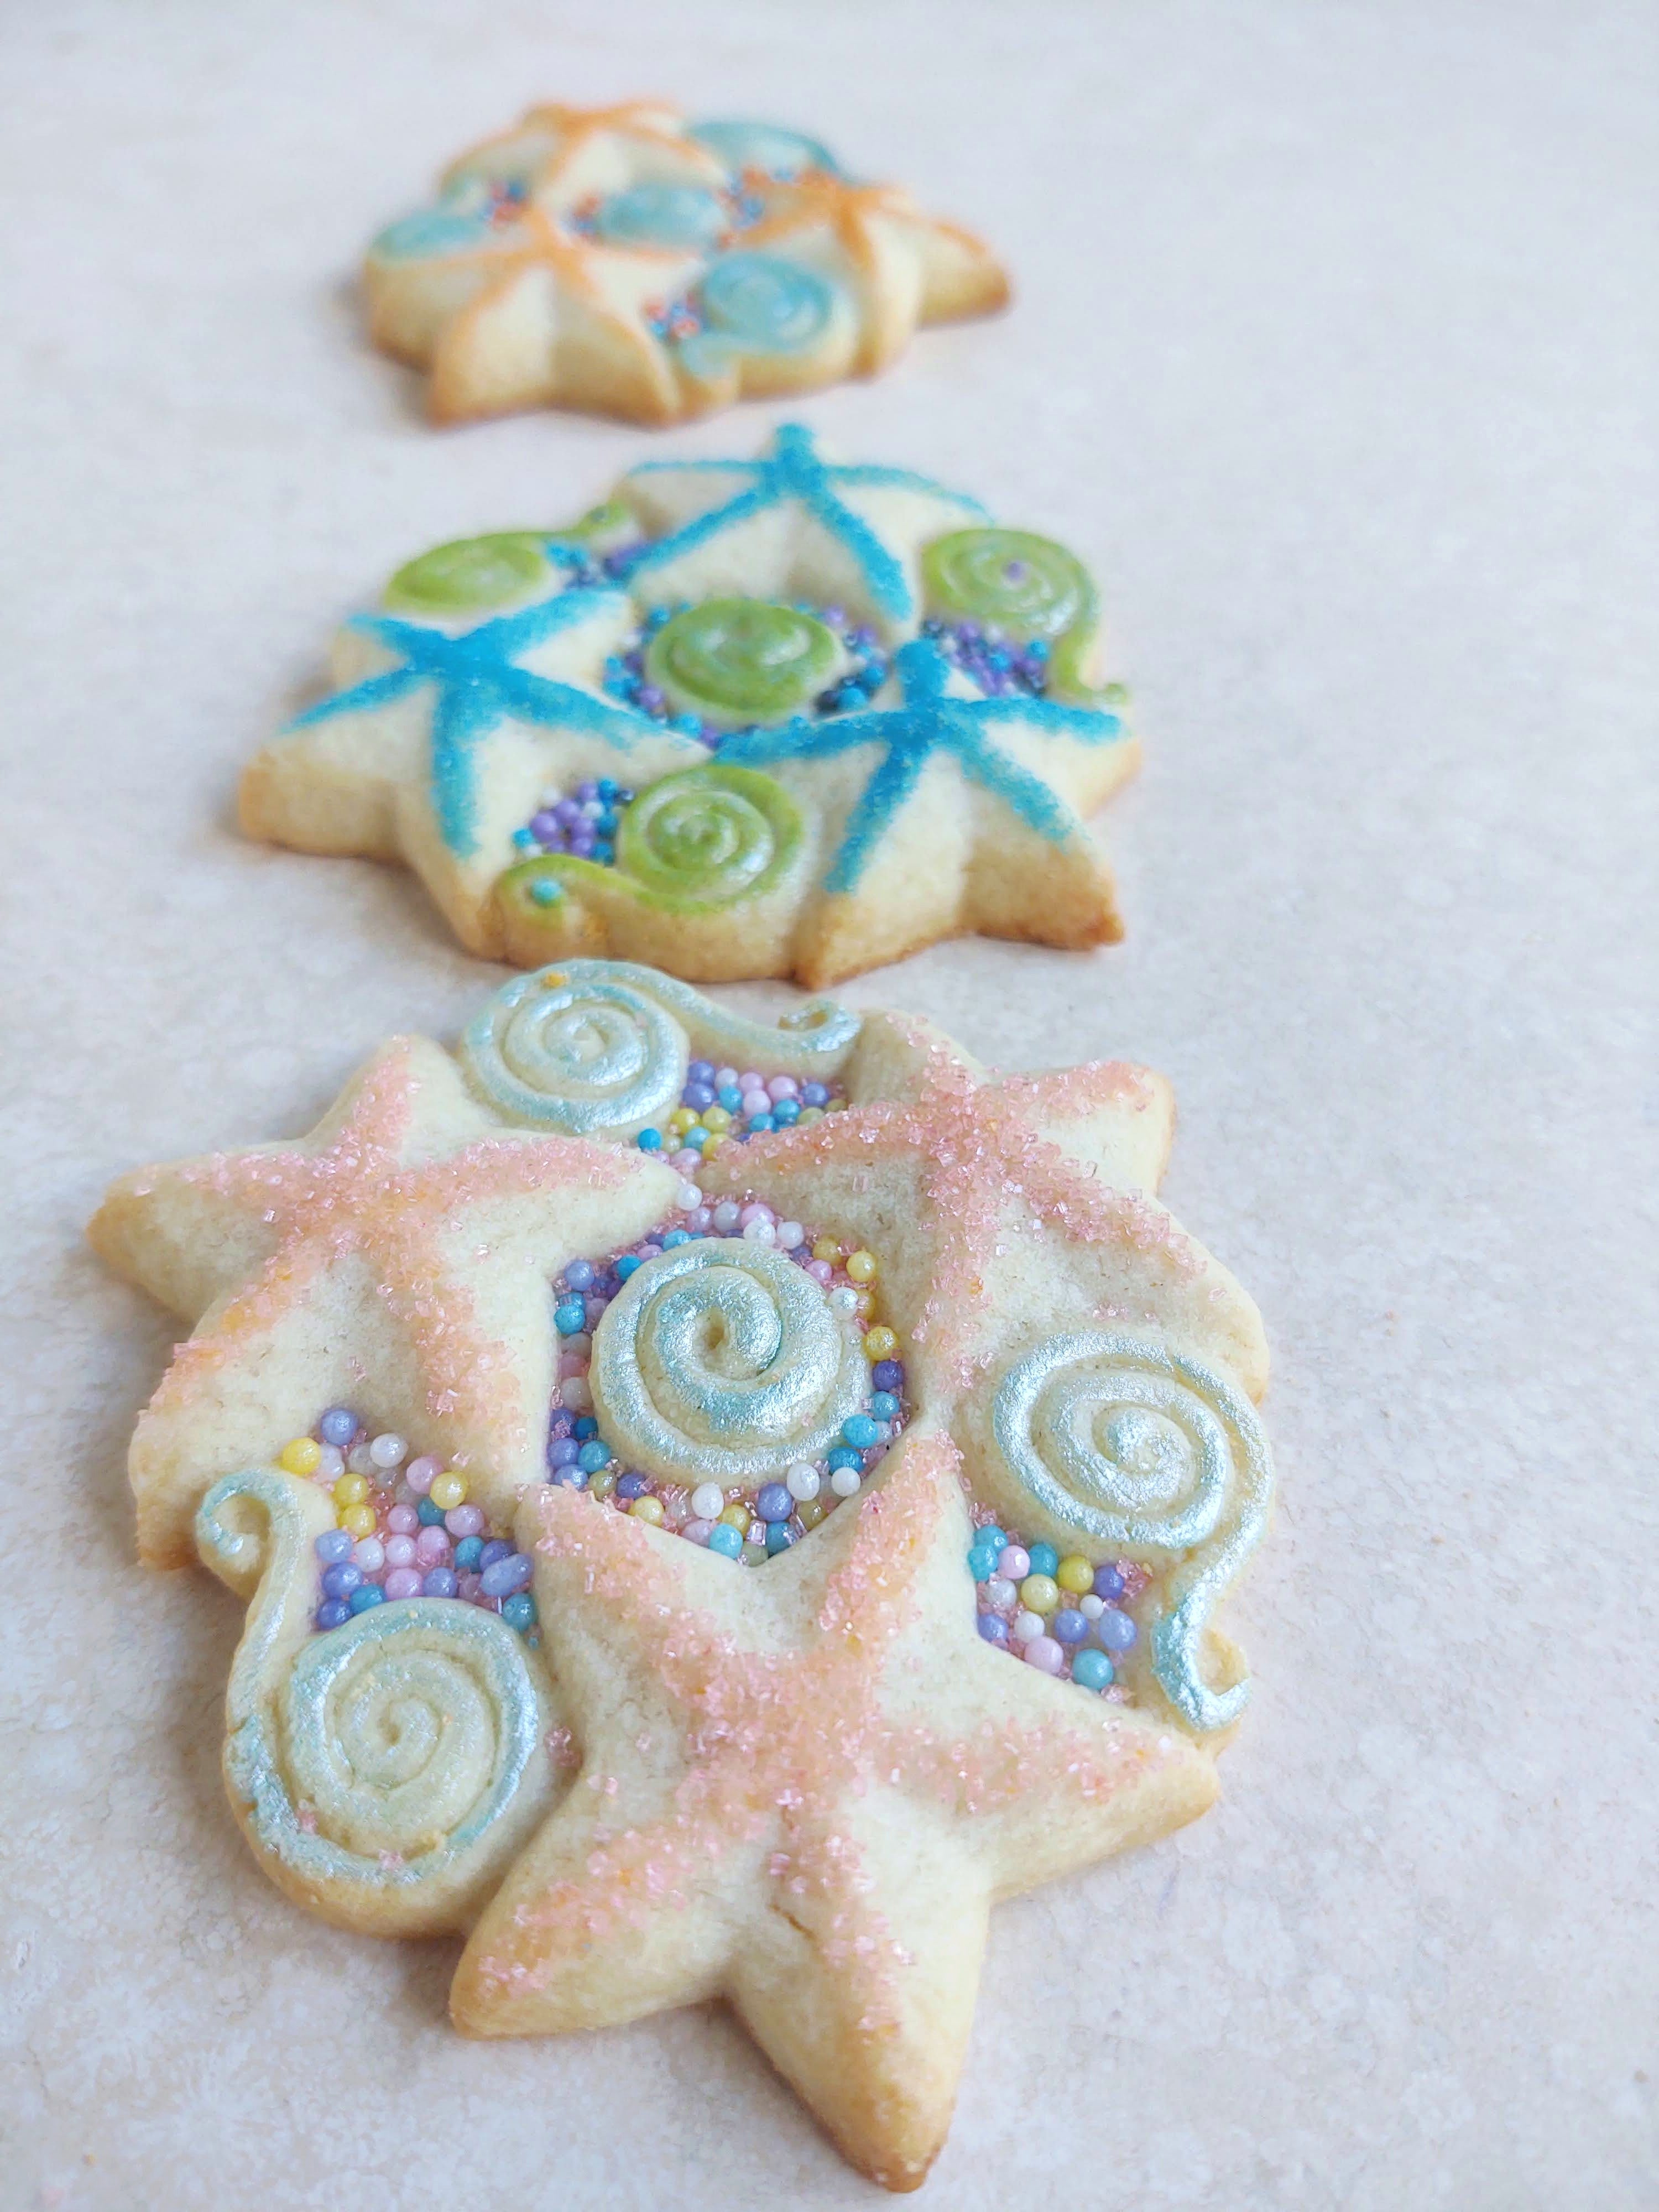 Star/Starfish Silicone Cookie Mold